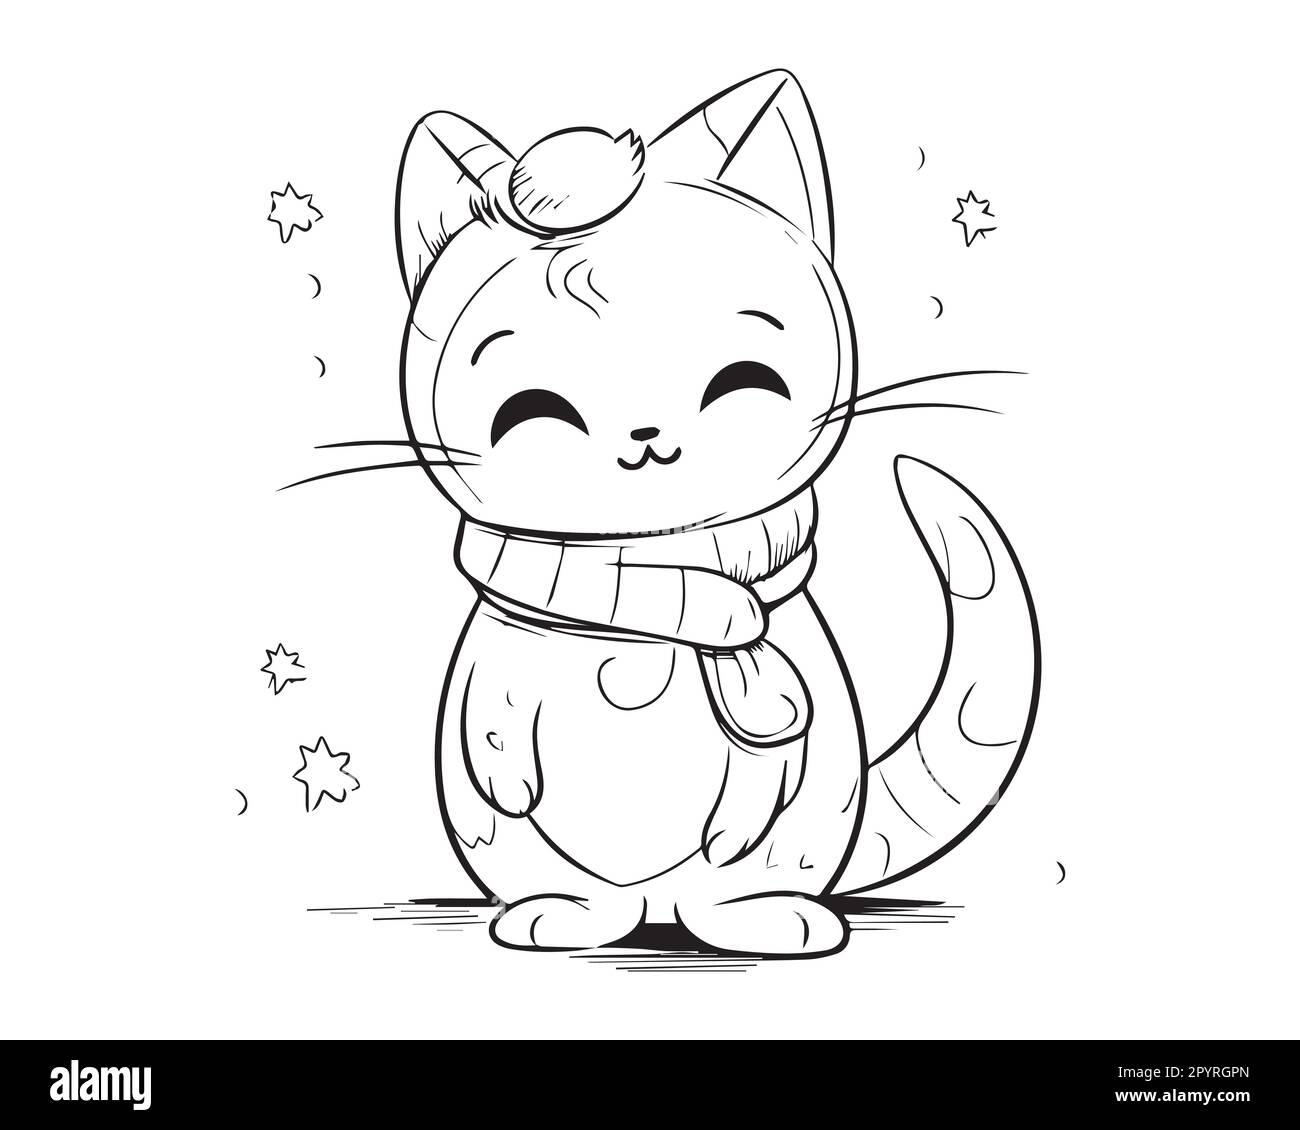 Free Anime Cat Boy Coloring Page  Coloring Page Printables  Kidadl